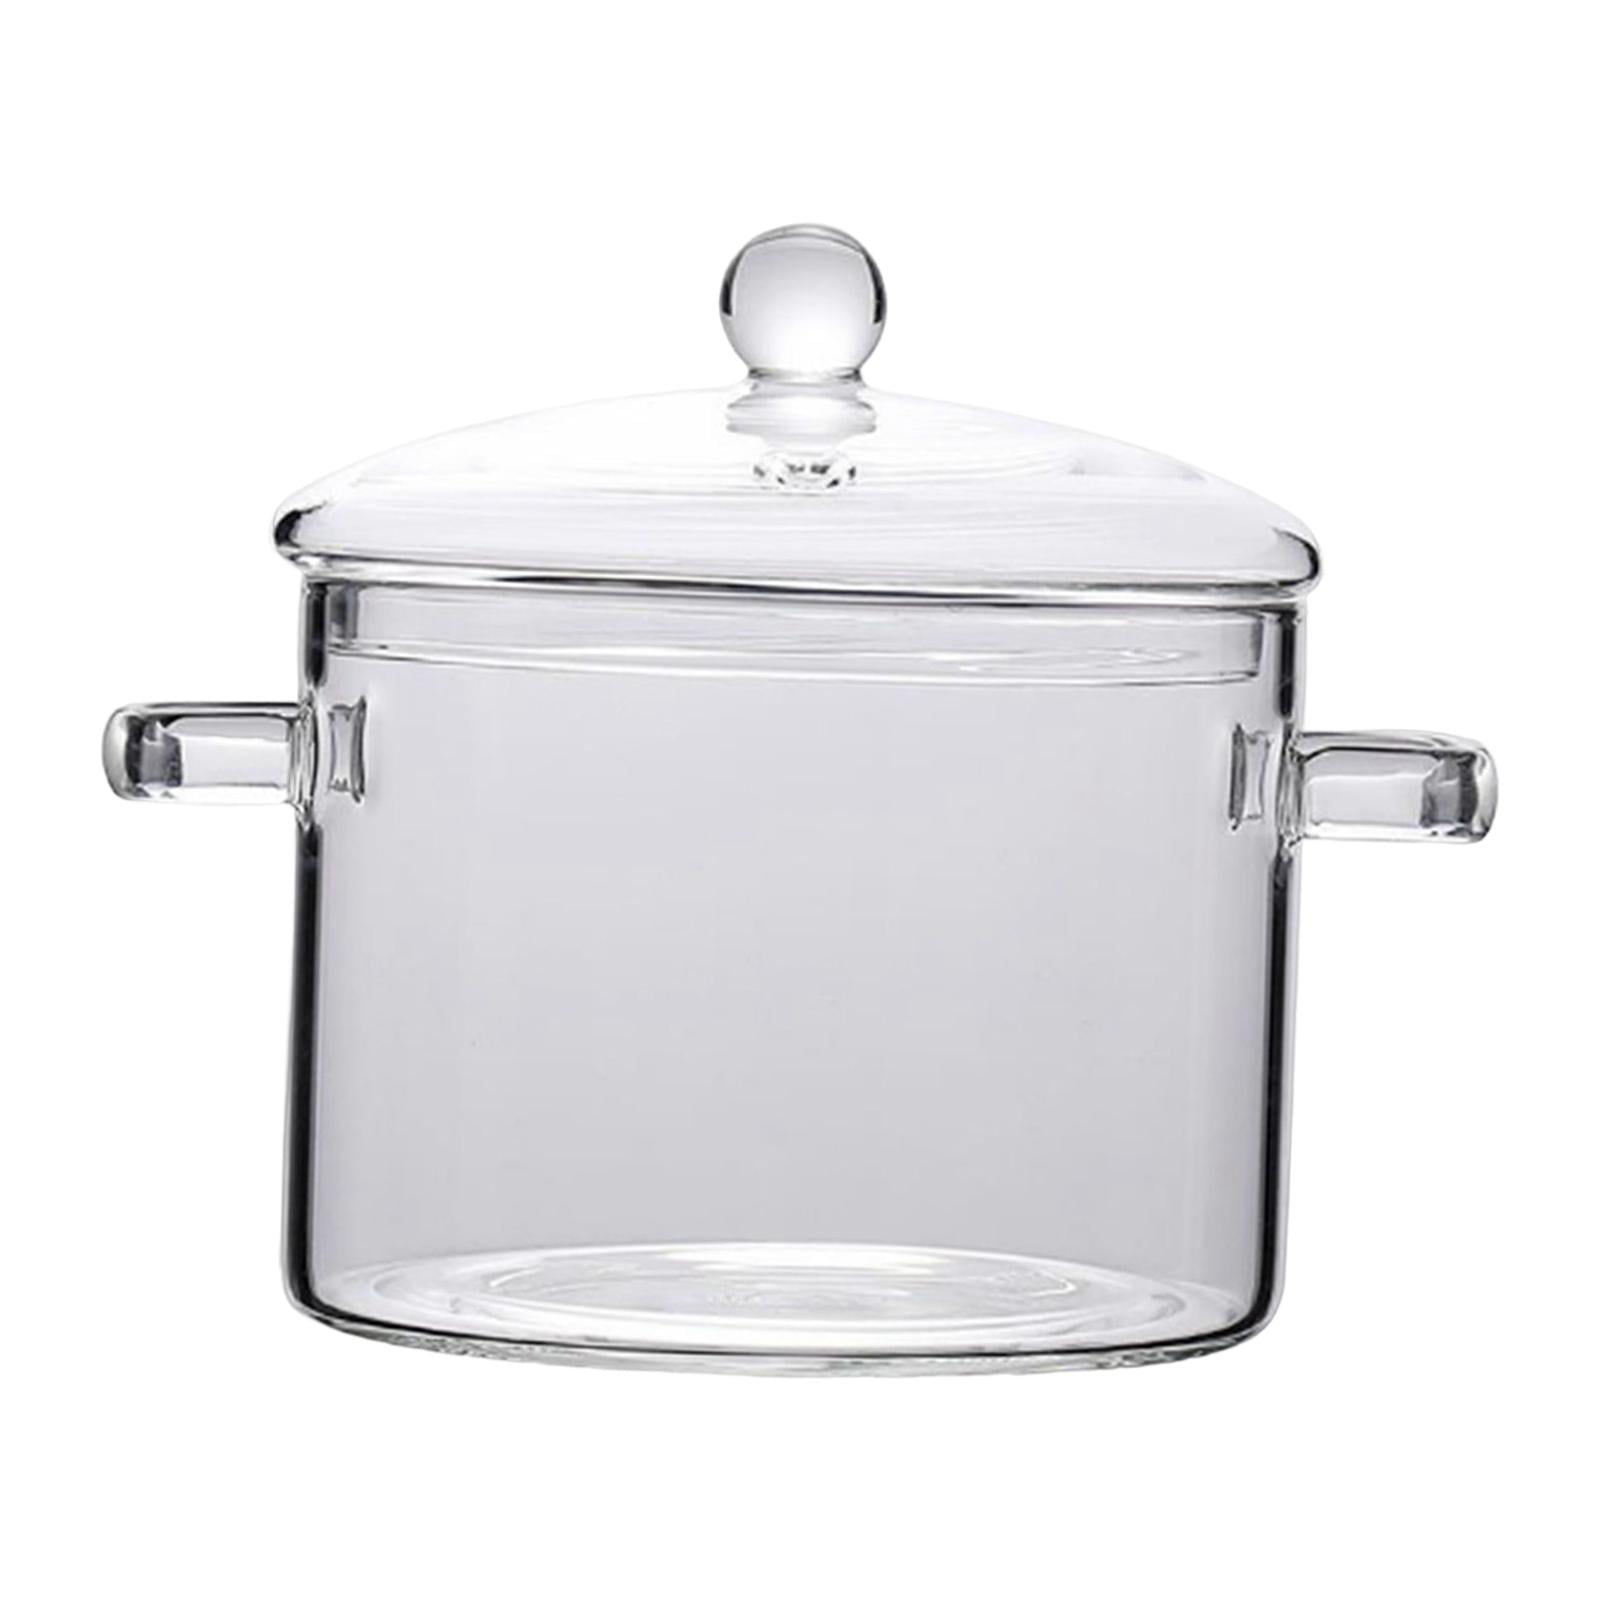 Pure Cook Cooking Pots, With Silicone Border Glass Lids, Stainless